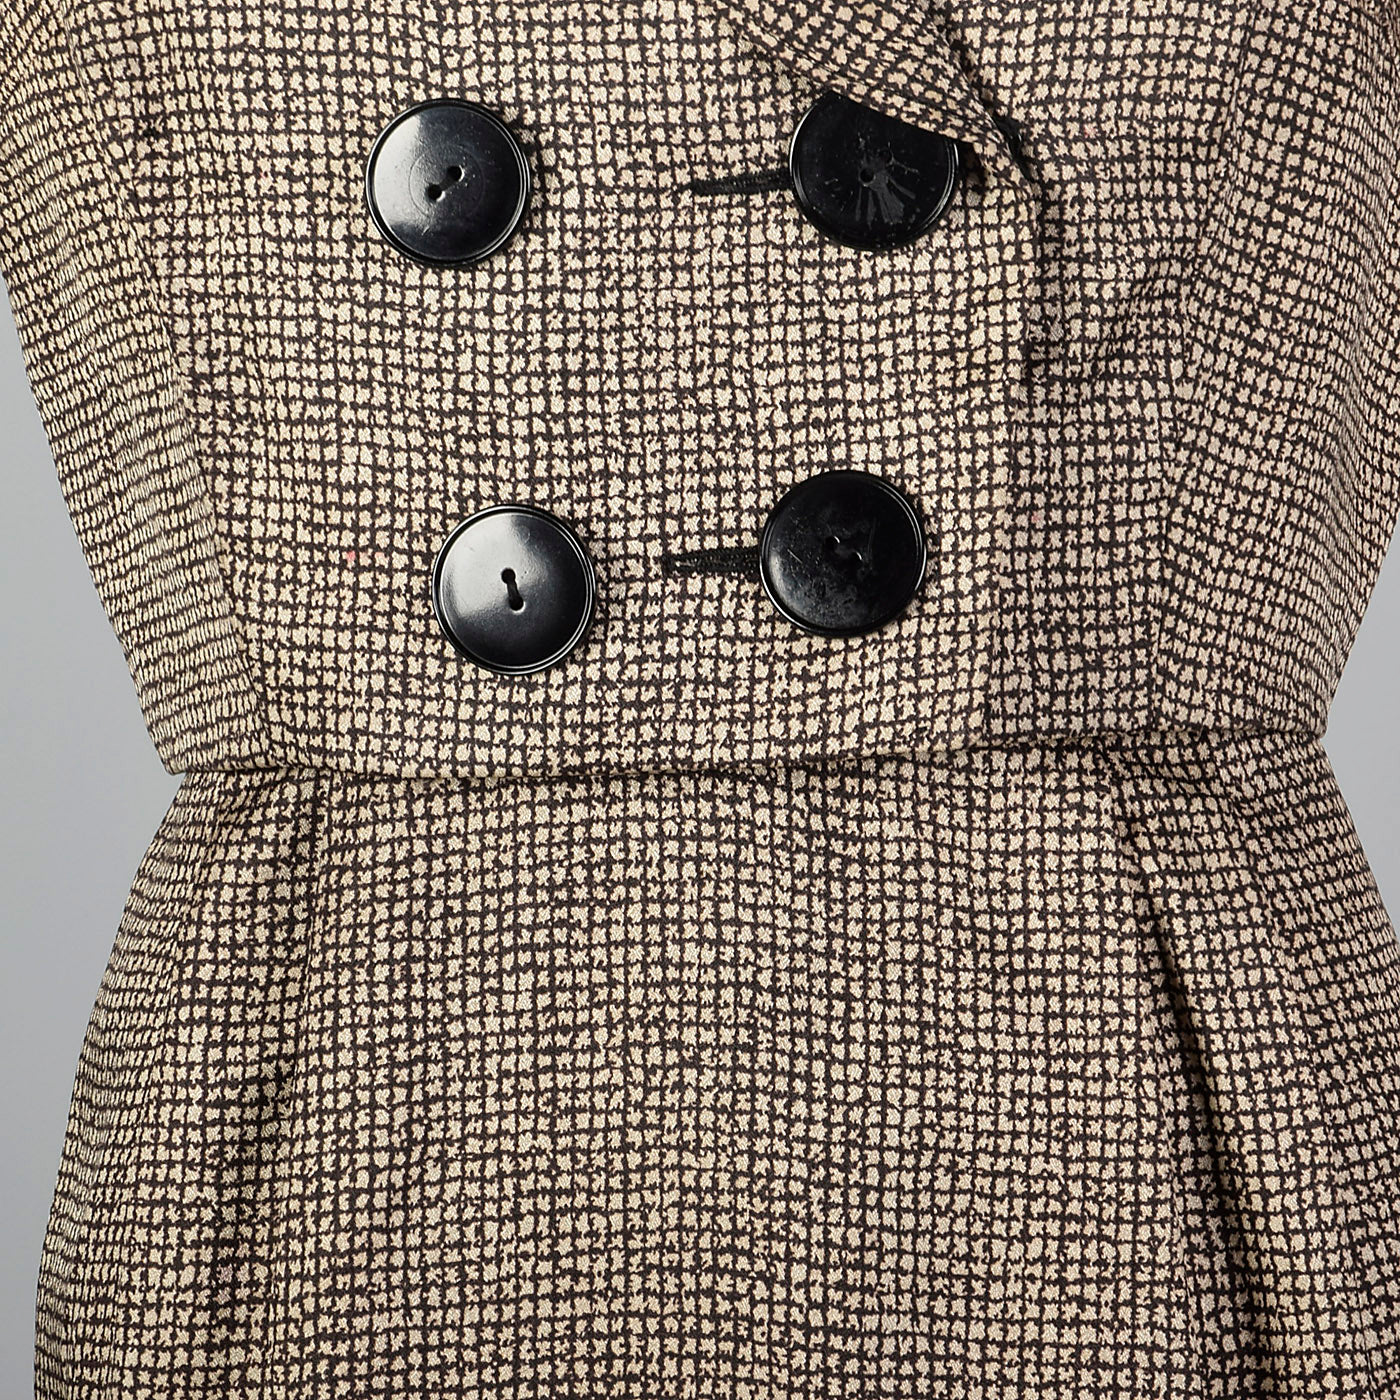 1950s Dress and Jacket Set with Removable Dickie